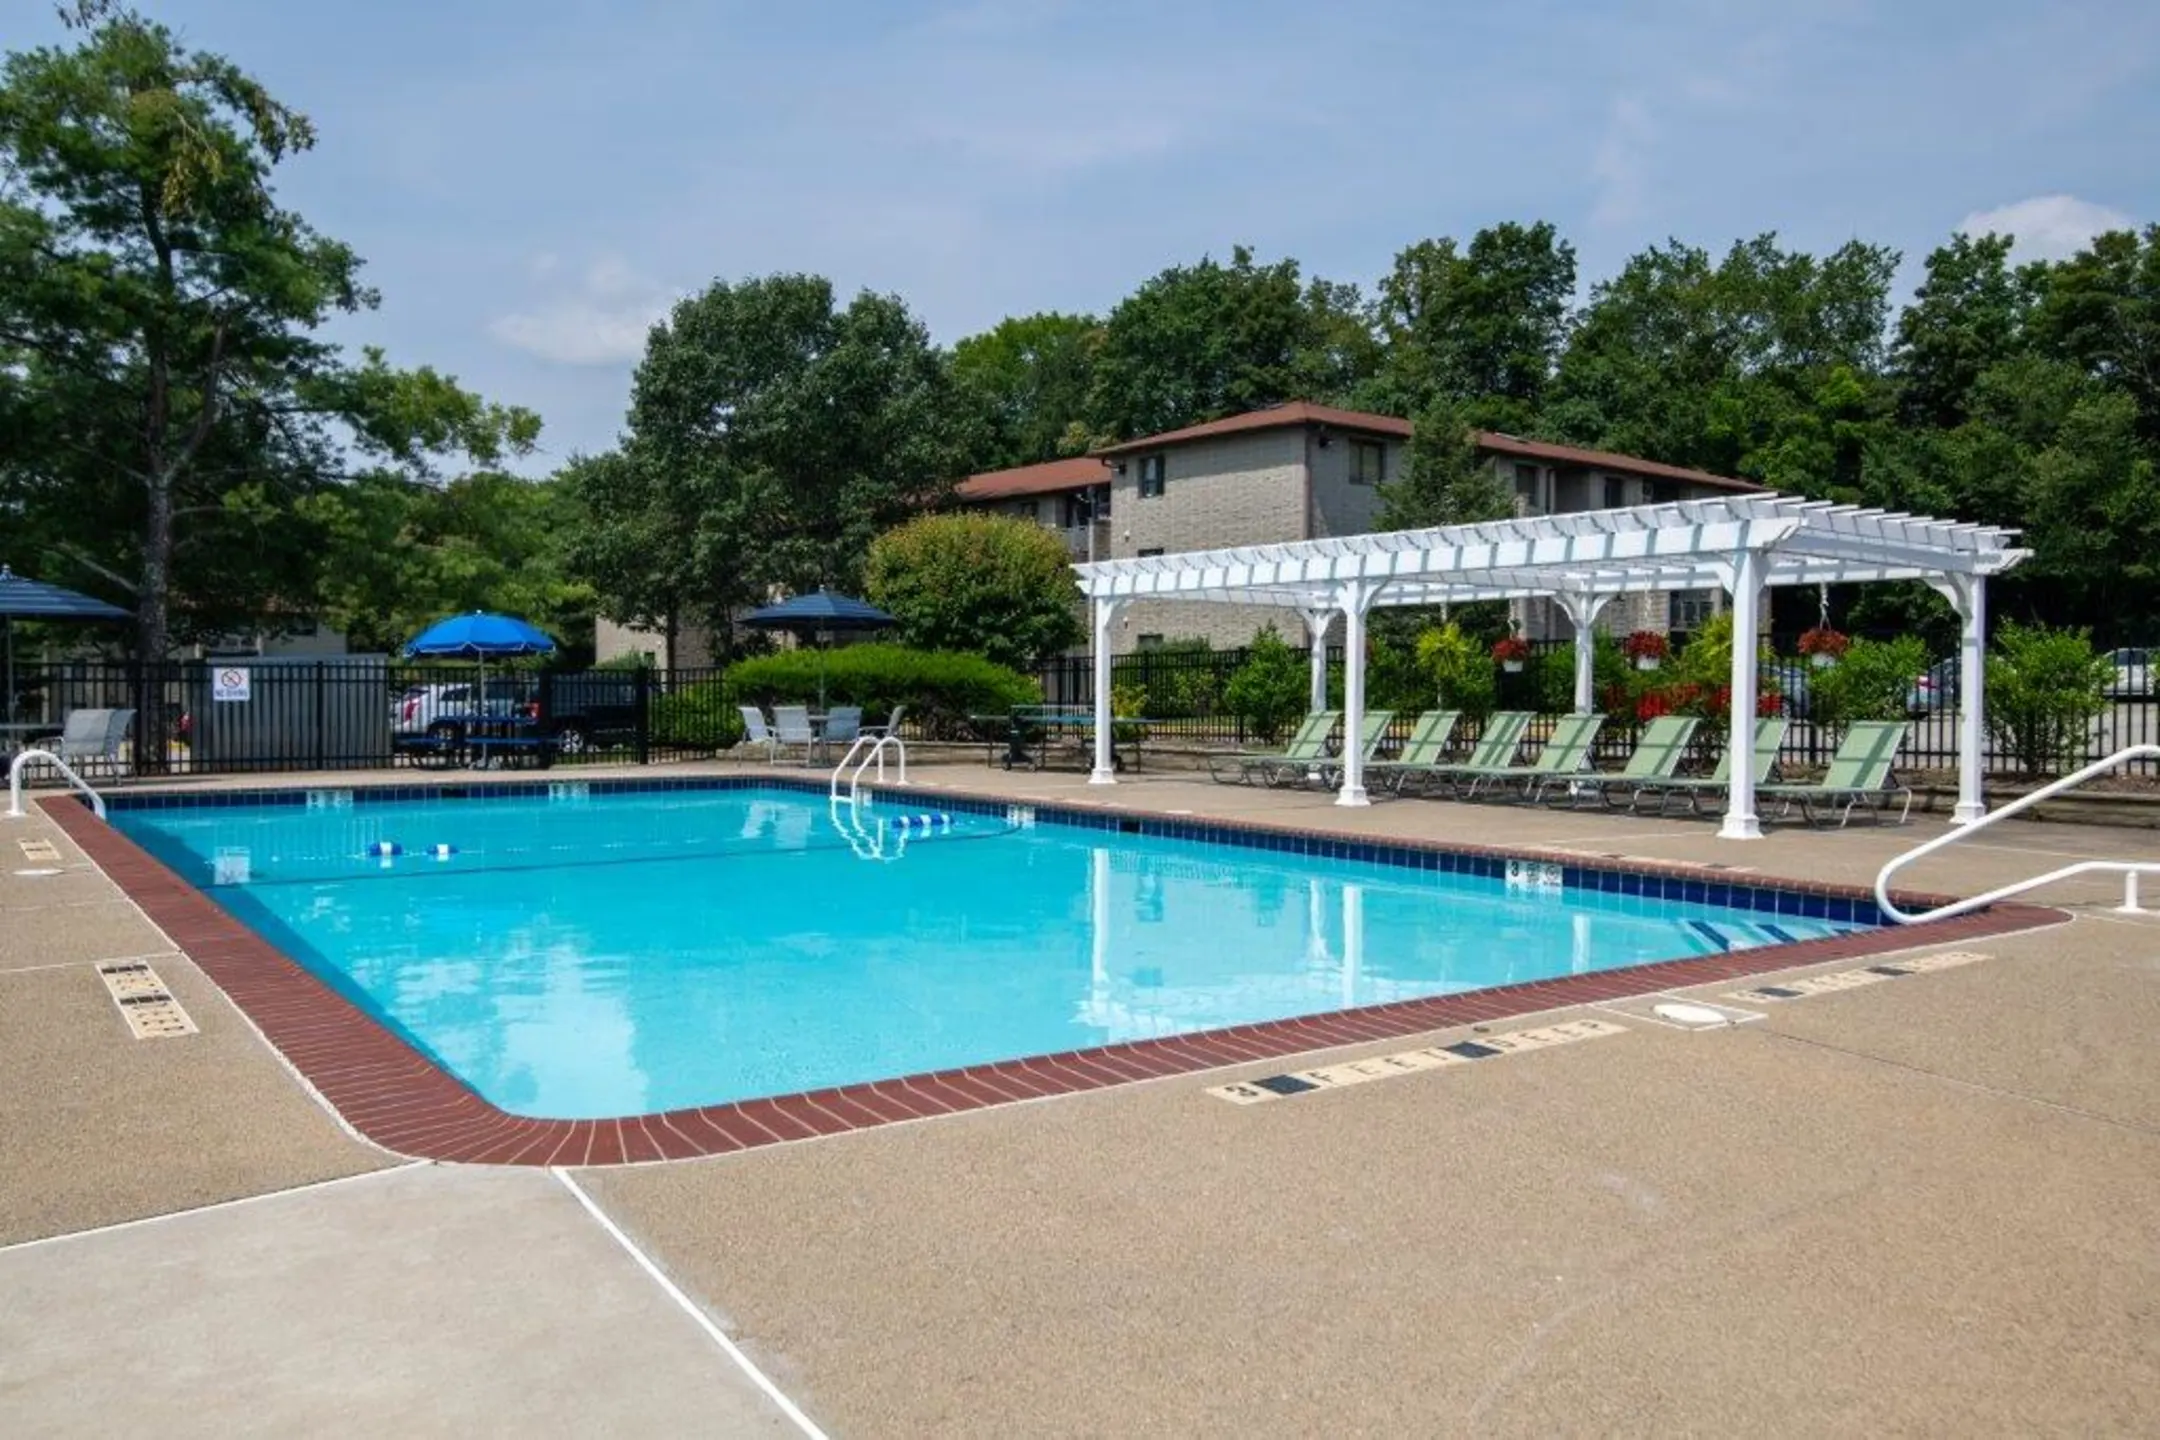 Pool - Imperial Gardens Apartment Homes - Middletown, NY